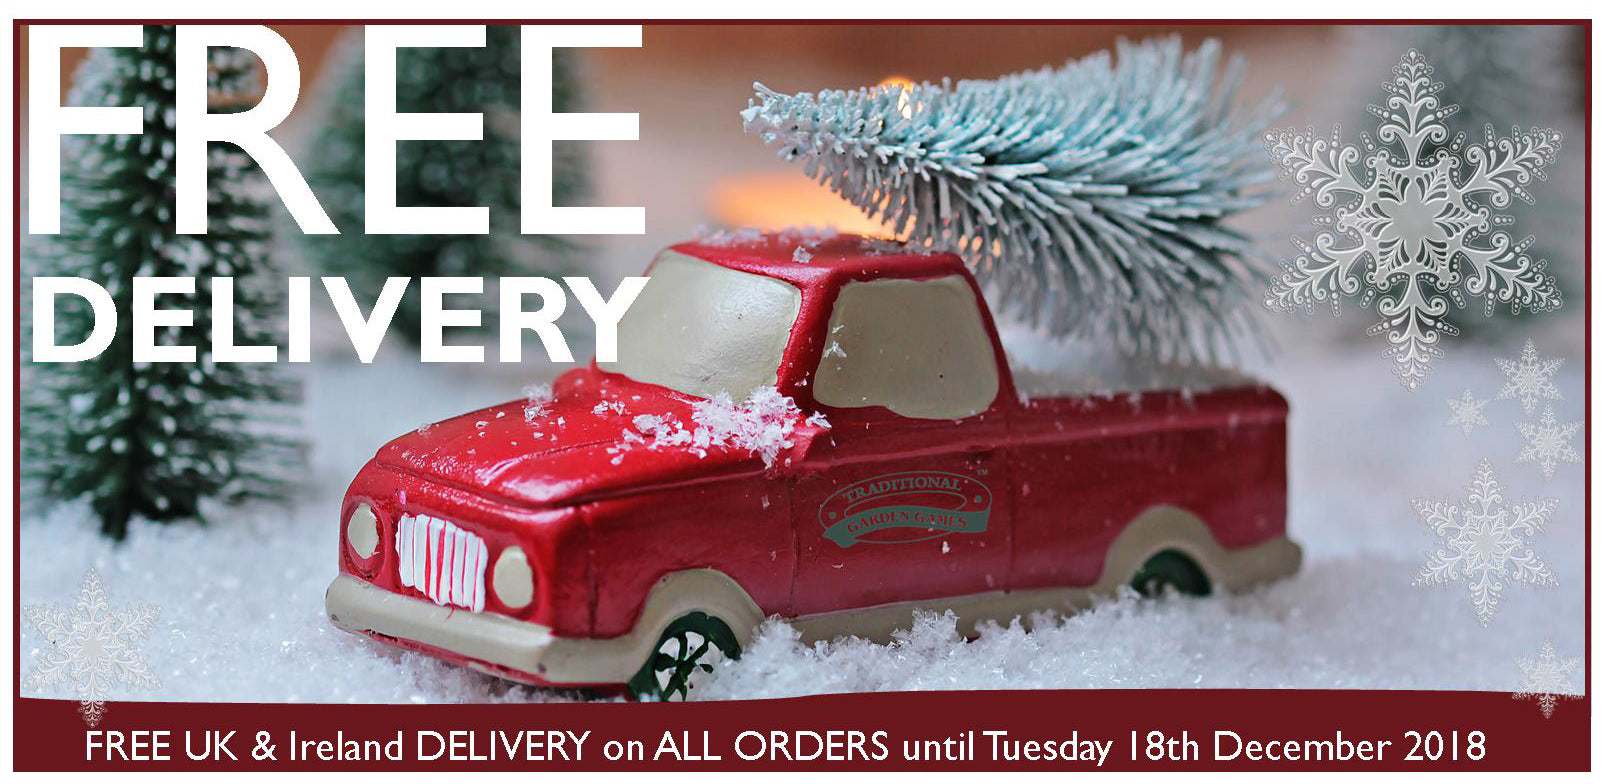 FREE delivery to UK and Ireland on ALL orders